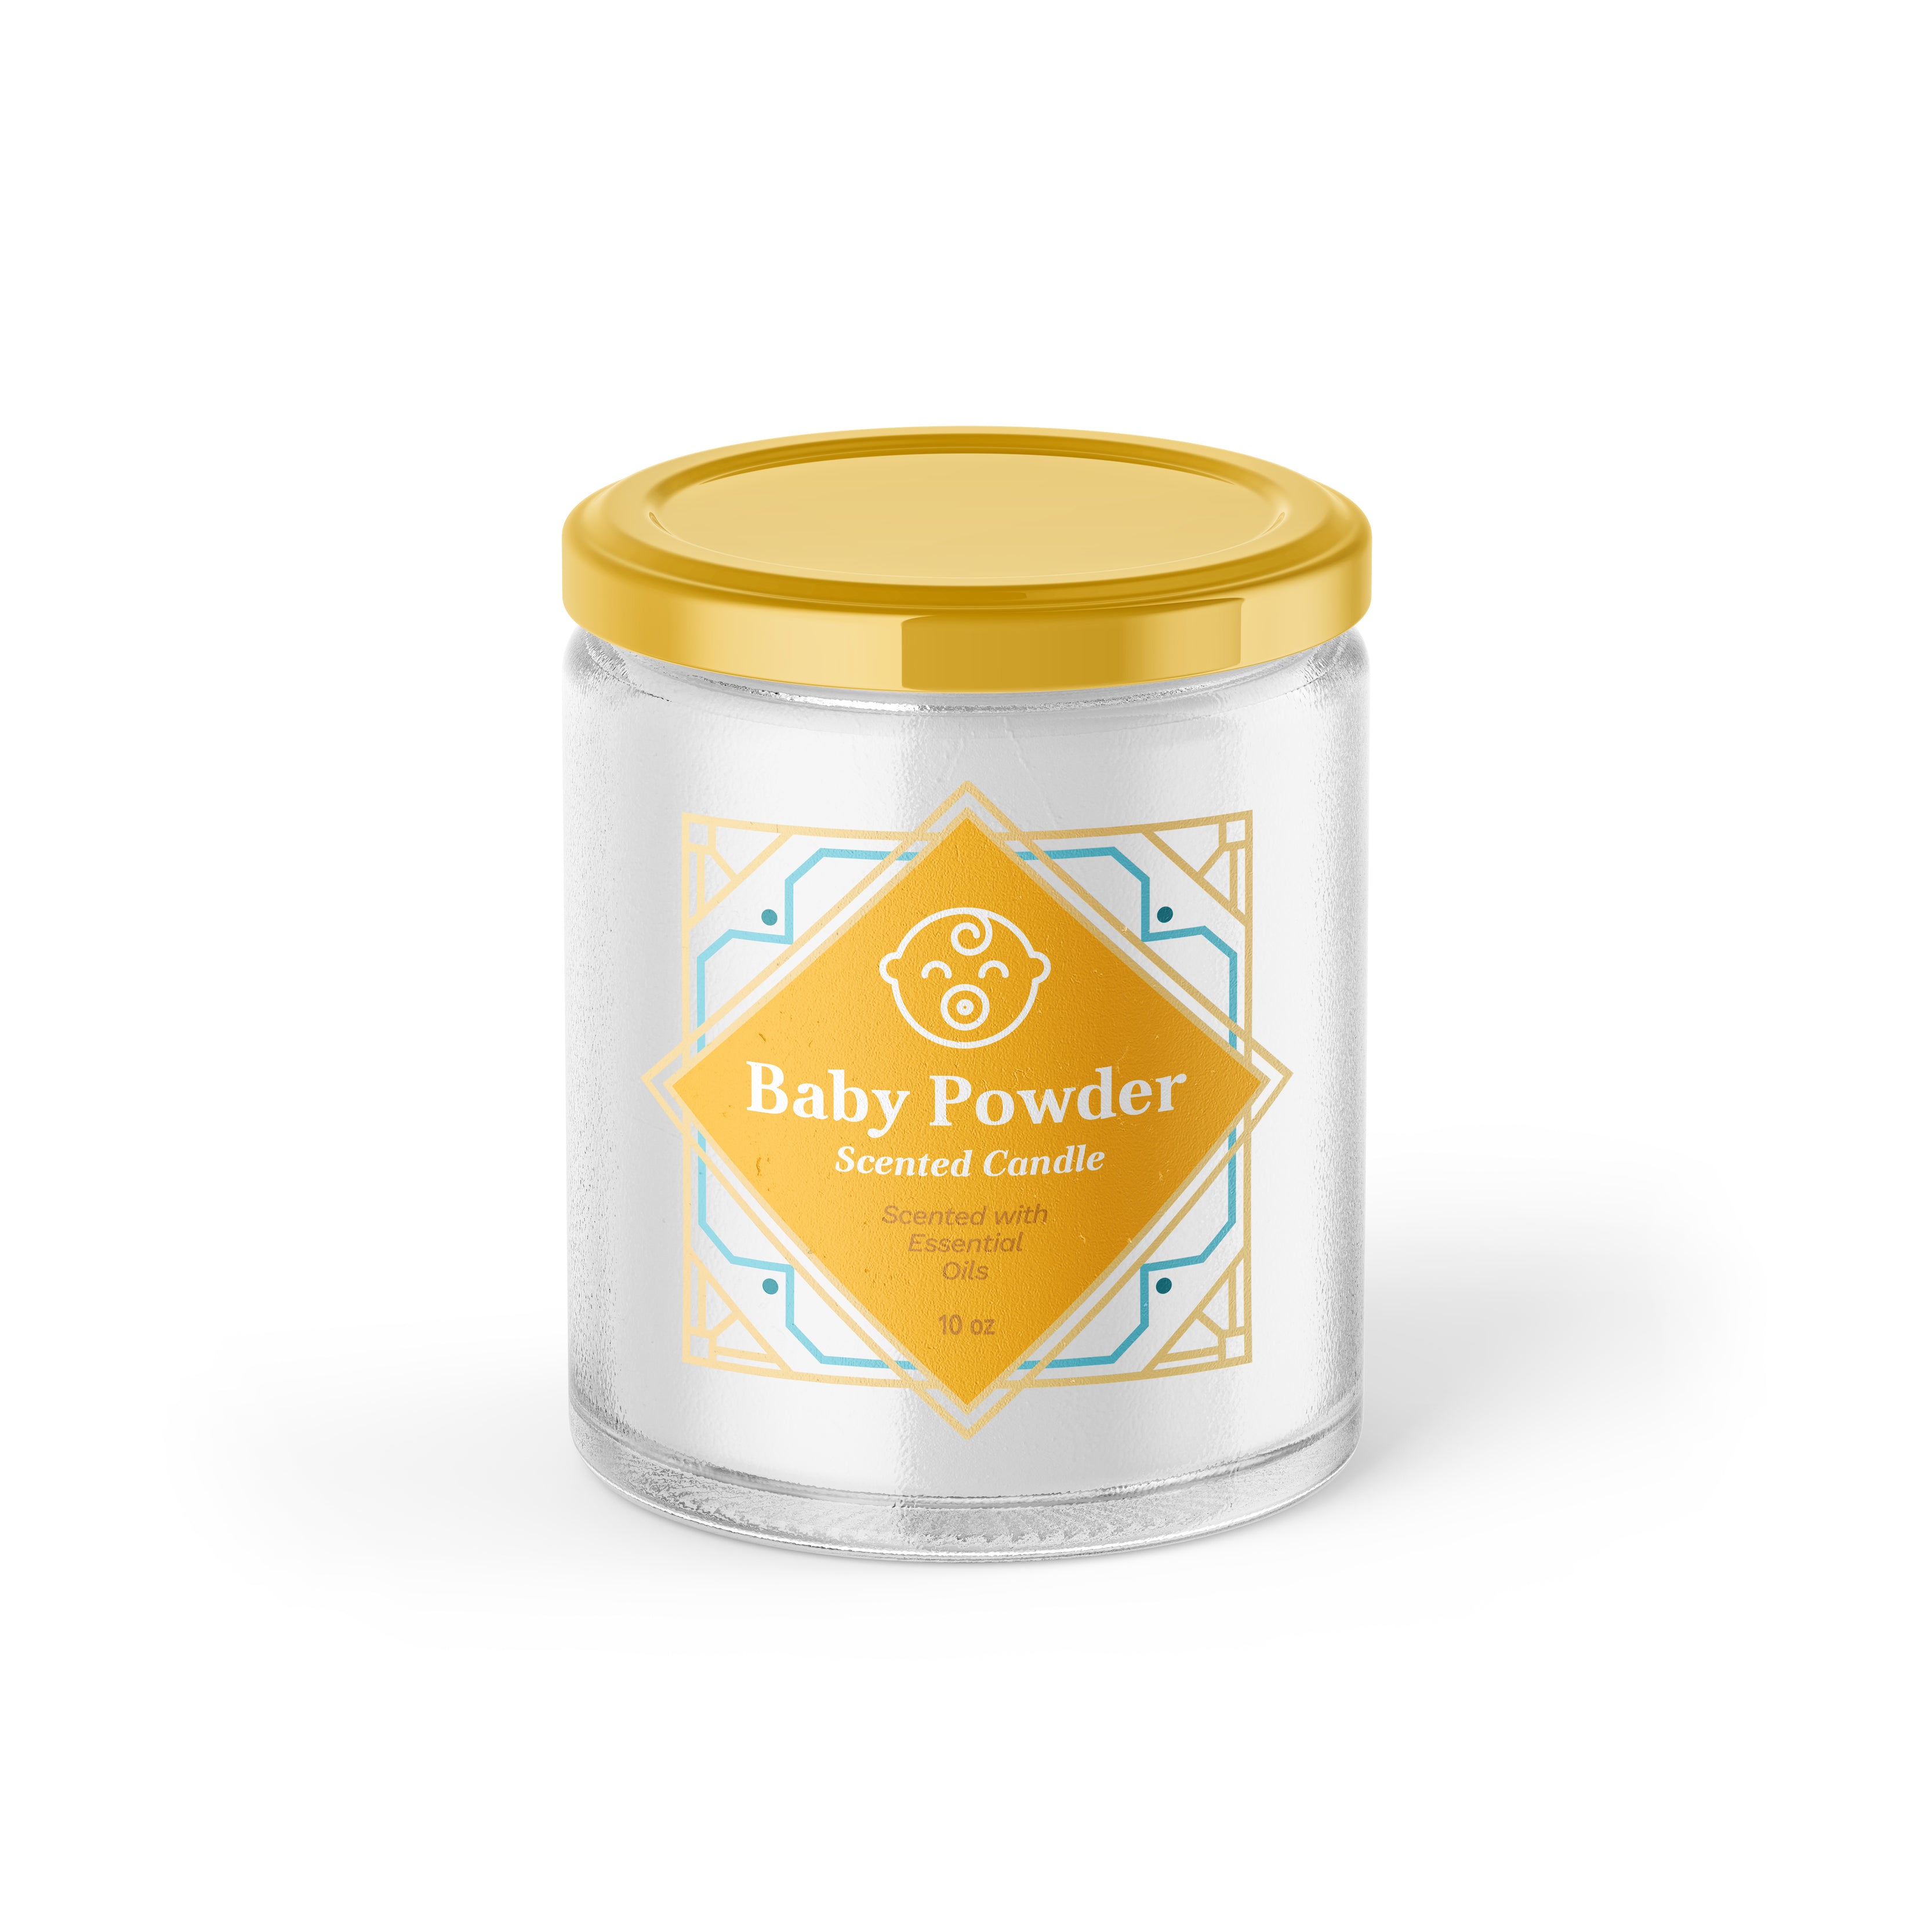 Baby Powder Scented Candle – CJ Labs